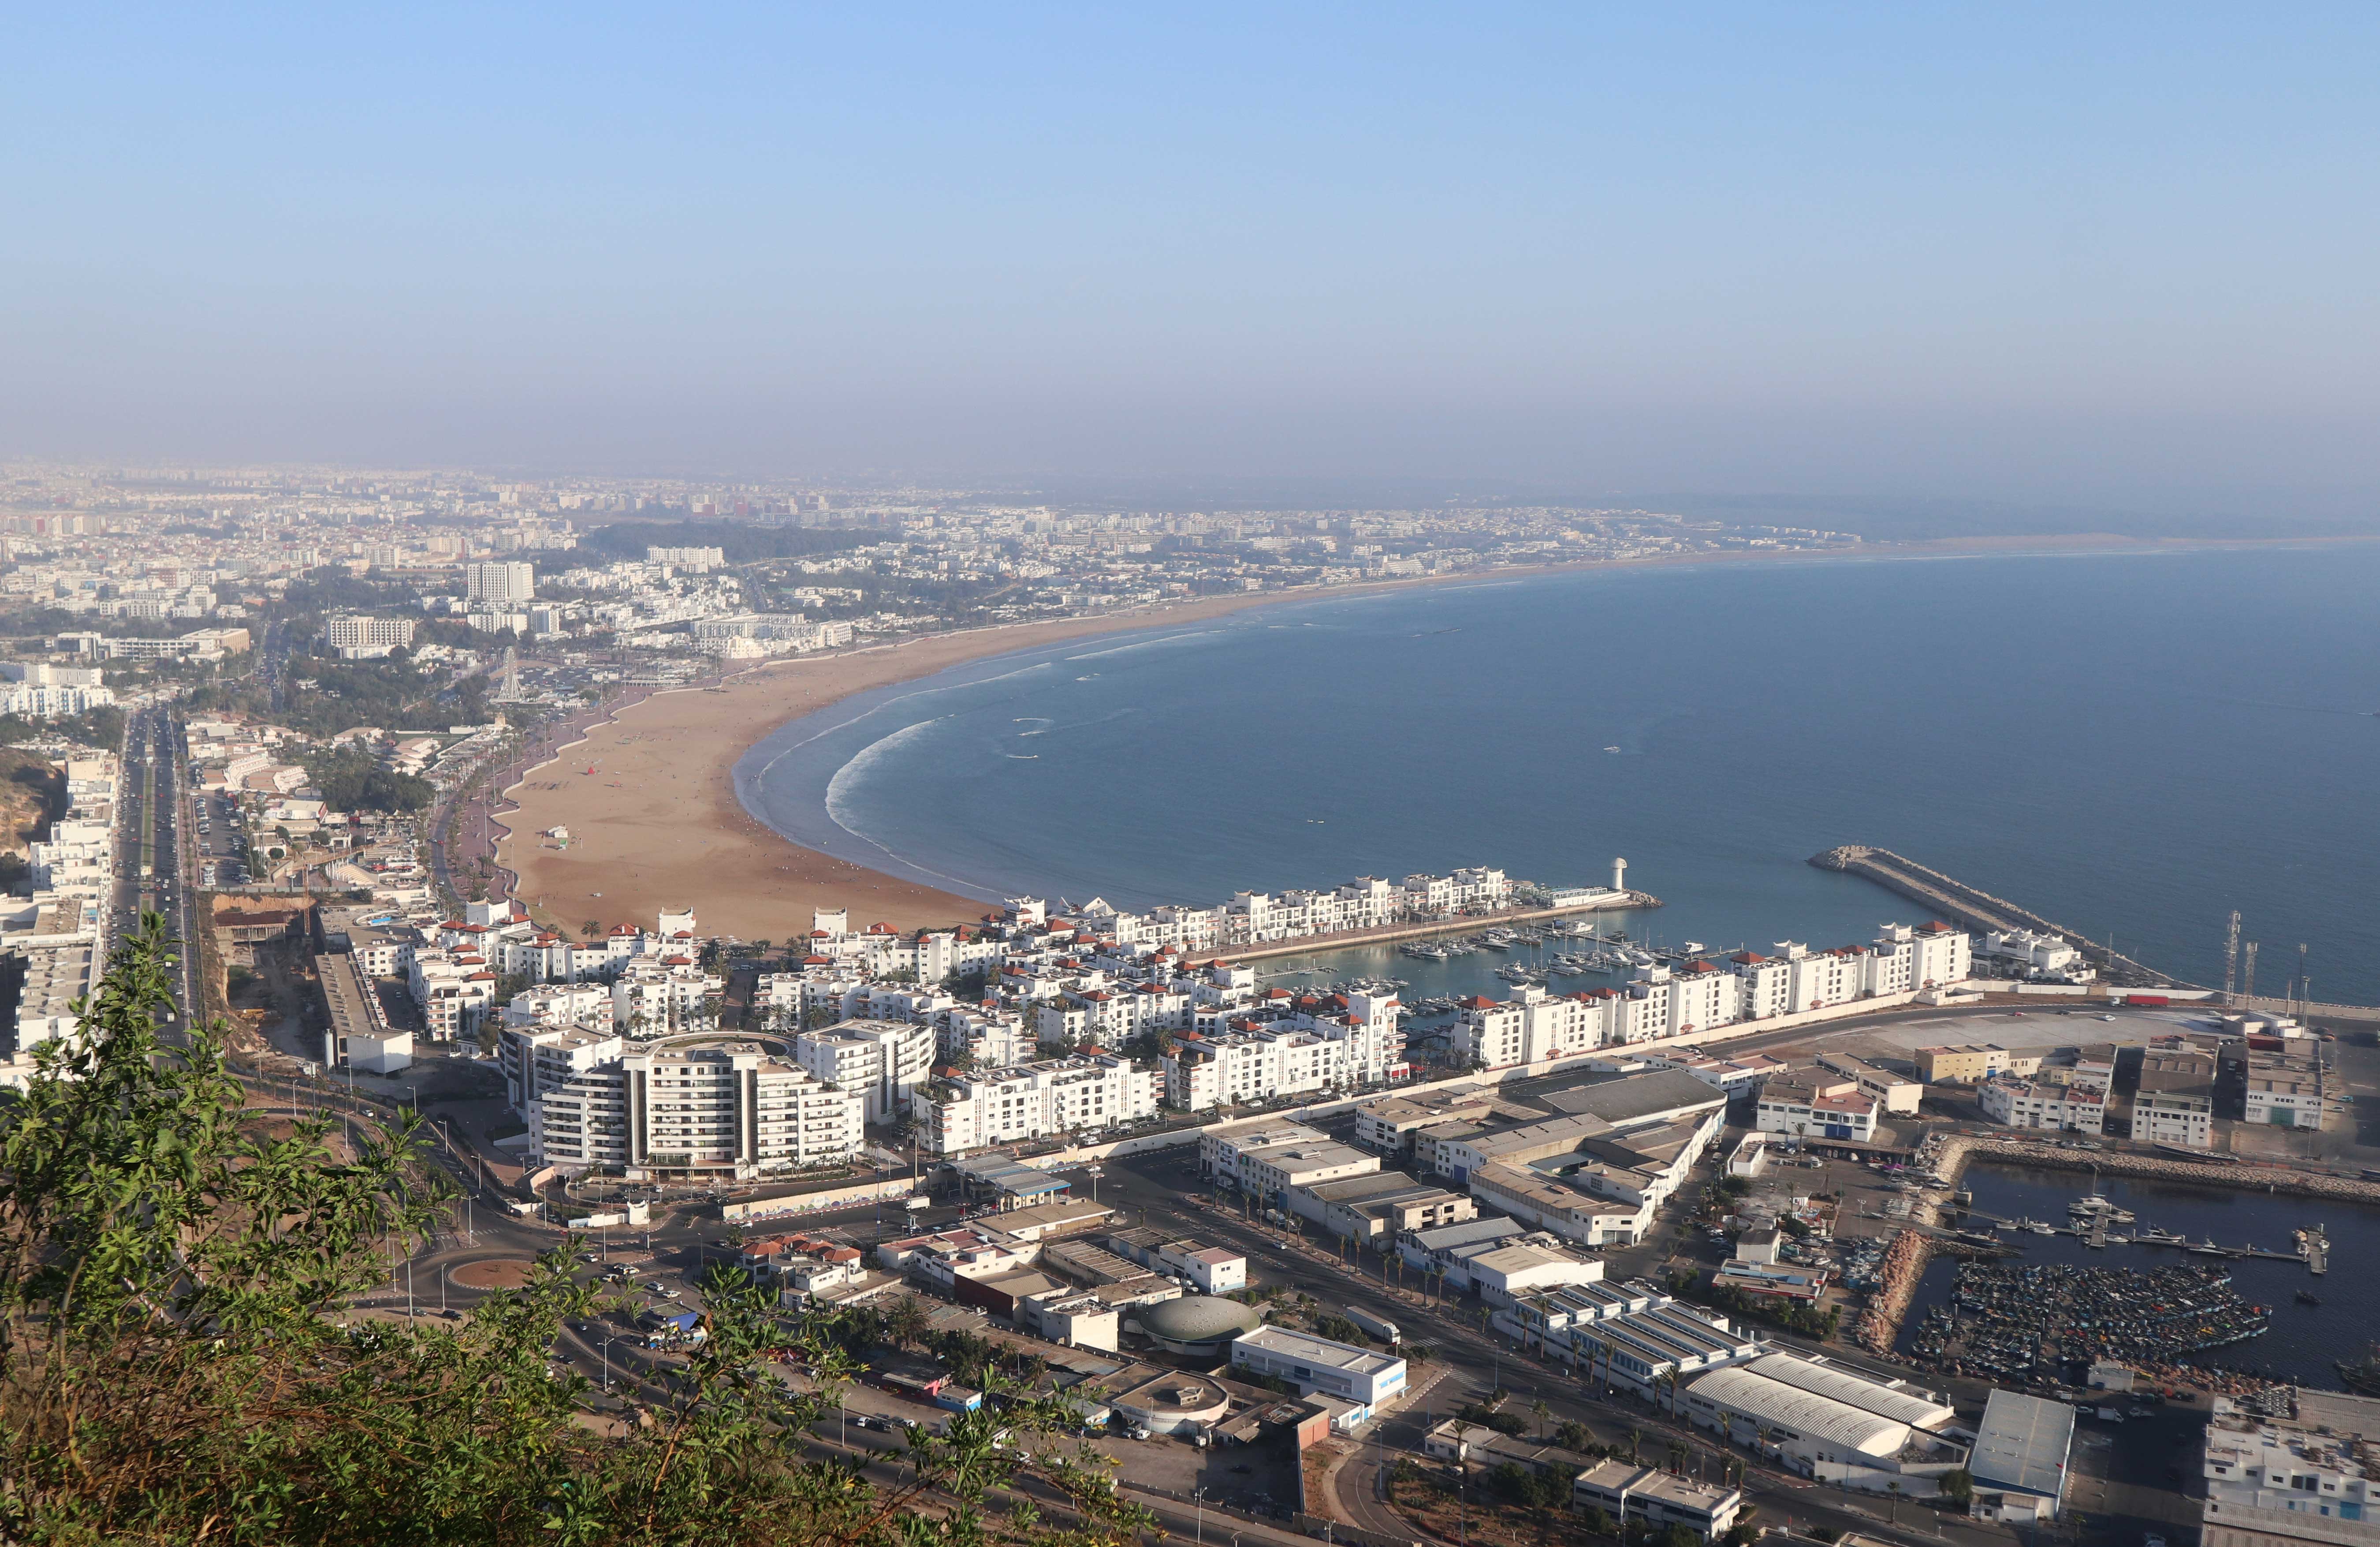 View from the Kasha of Agadir